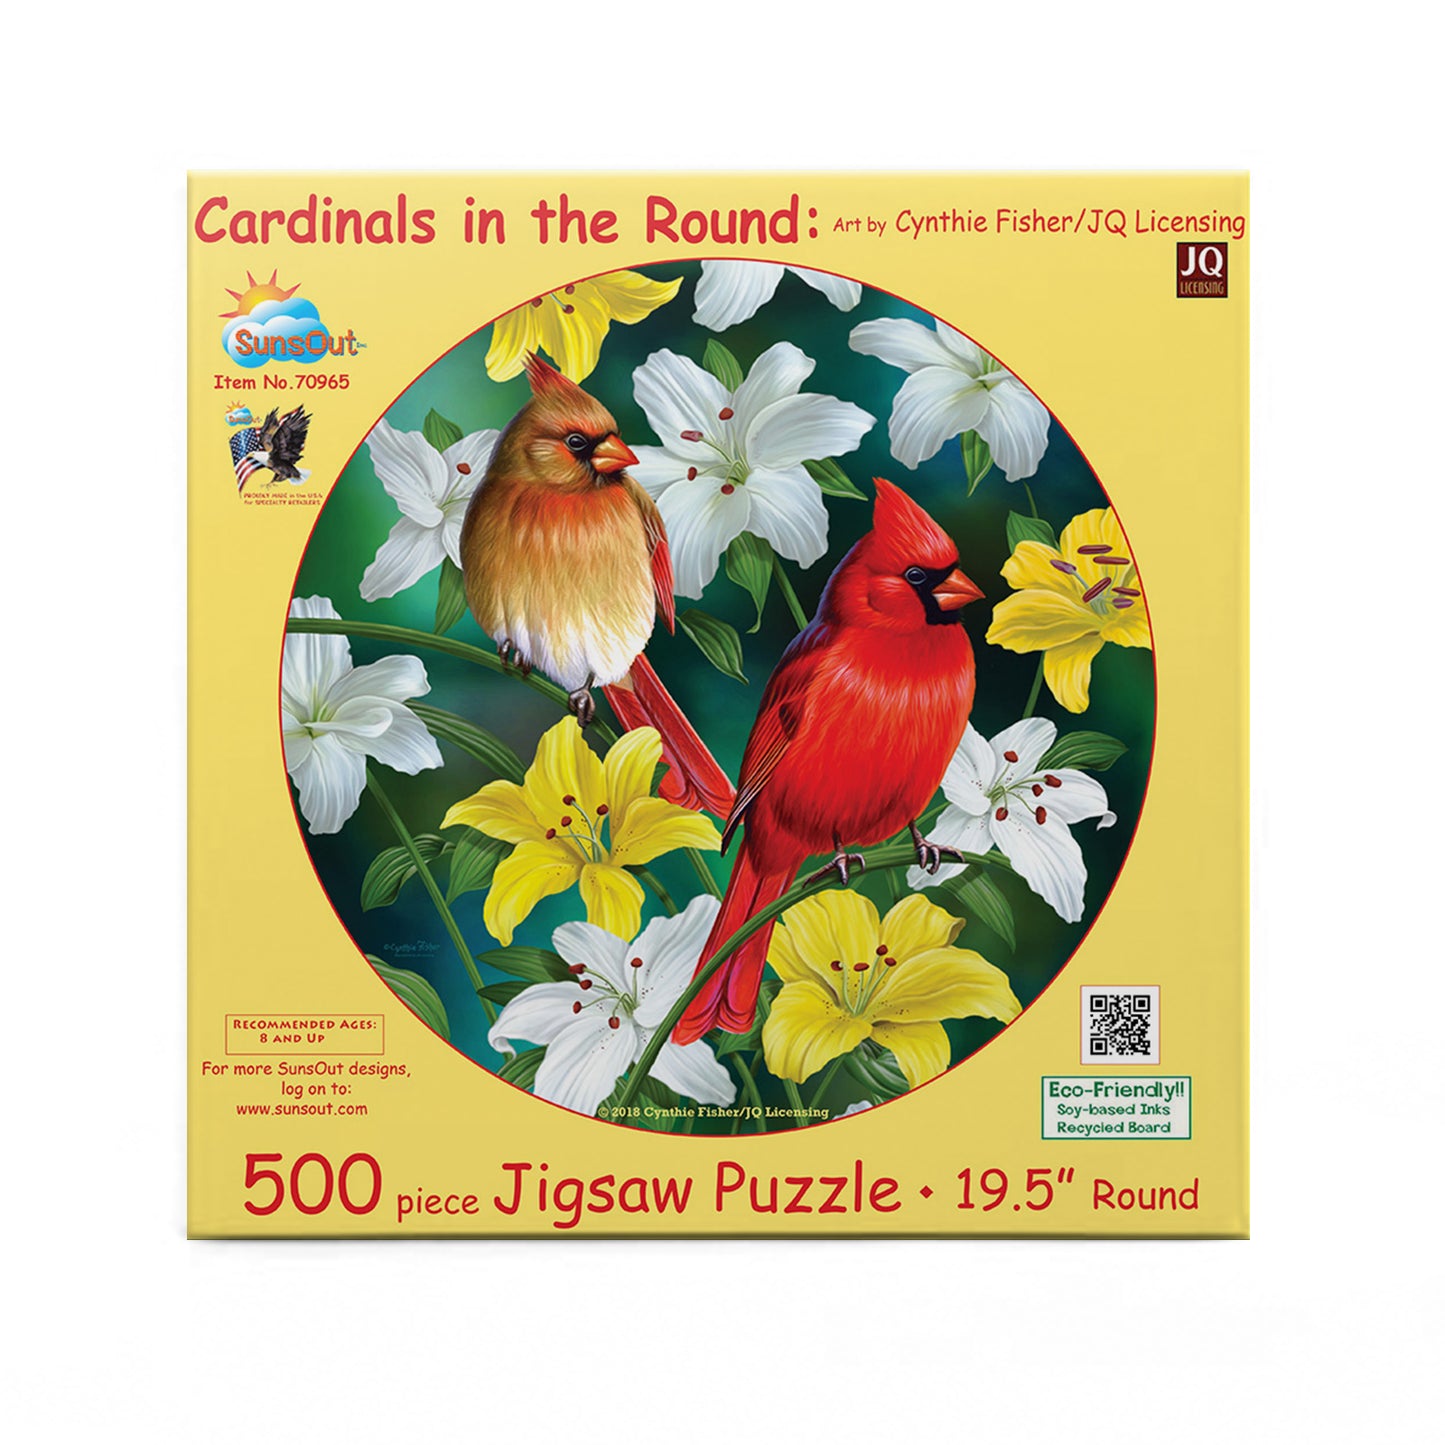 Cardinals in the Round - 500 Piece Jigsaw Puzzle